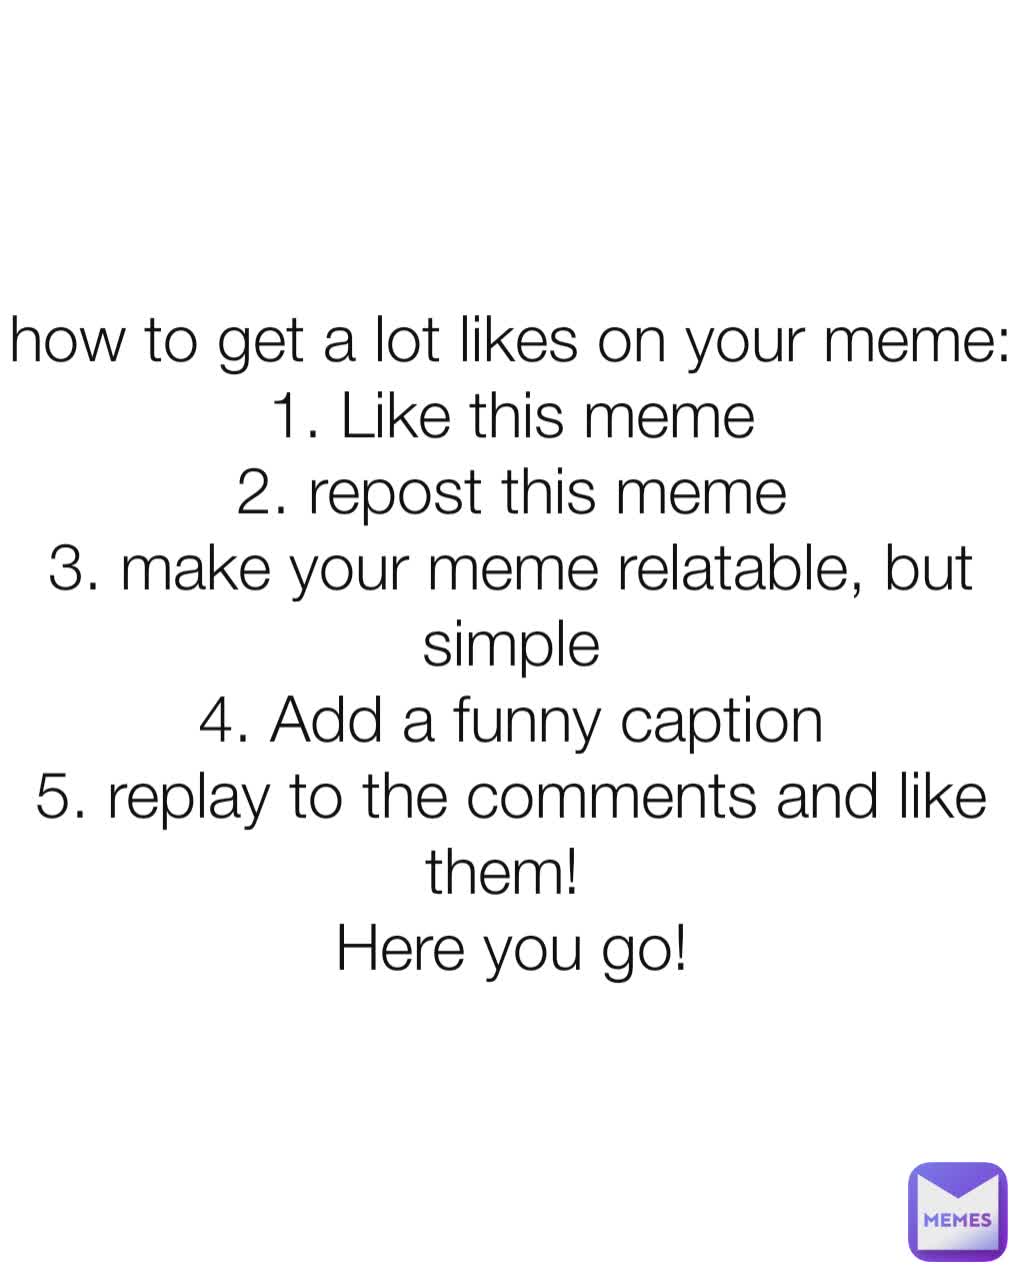 how to get a lot likes on your meme:
1. Like this meme
2. repost this meme
3. make your meme relatable, but simple
4. Add a funny caption
5. replay to the comments and like them! 
Here you go!